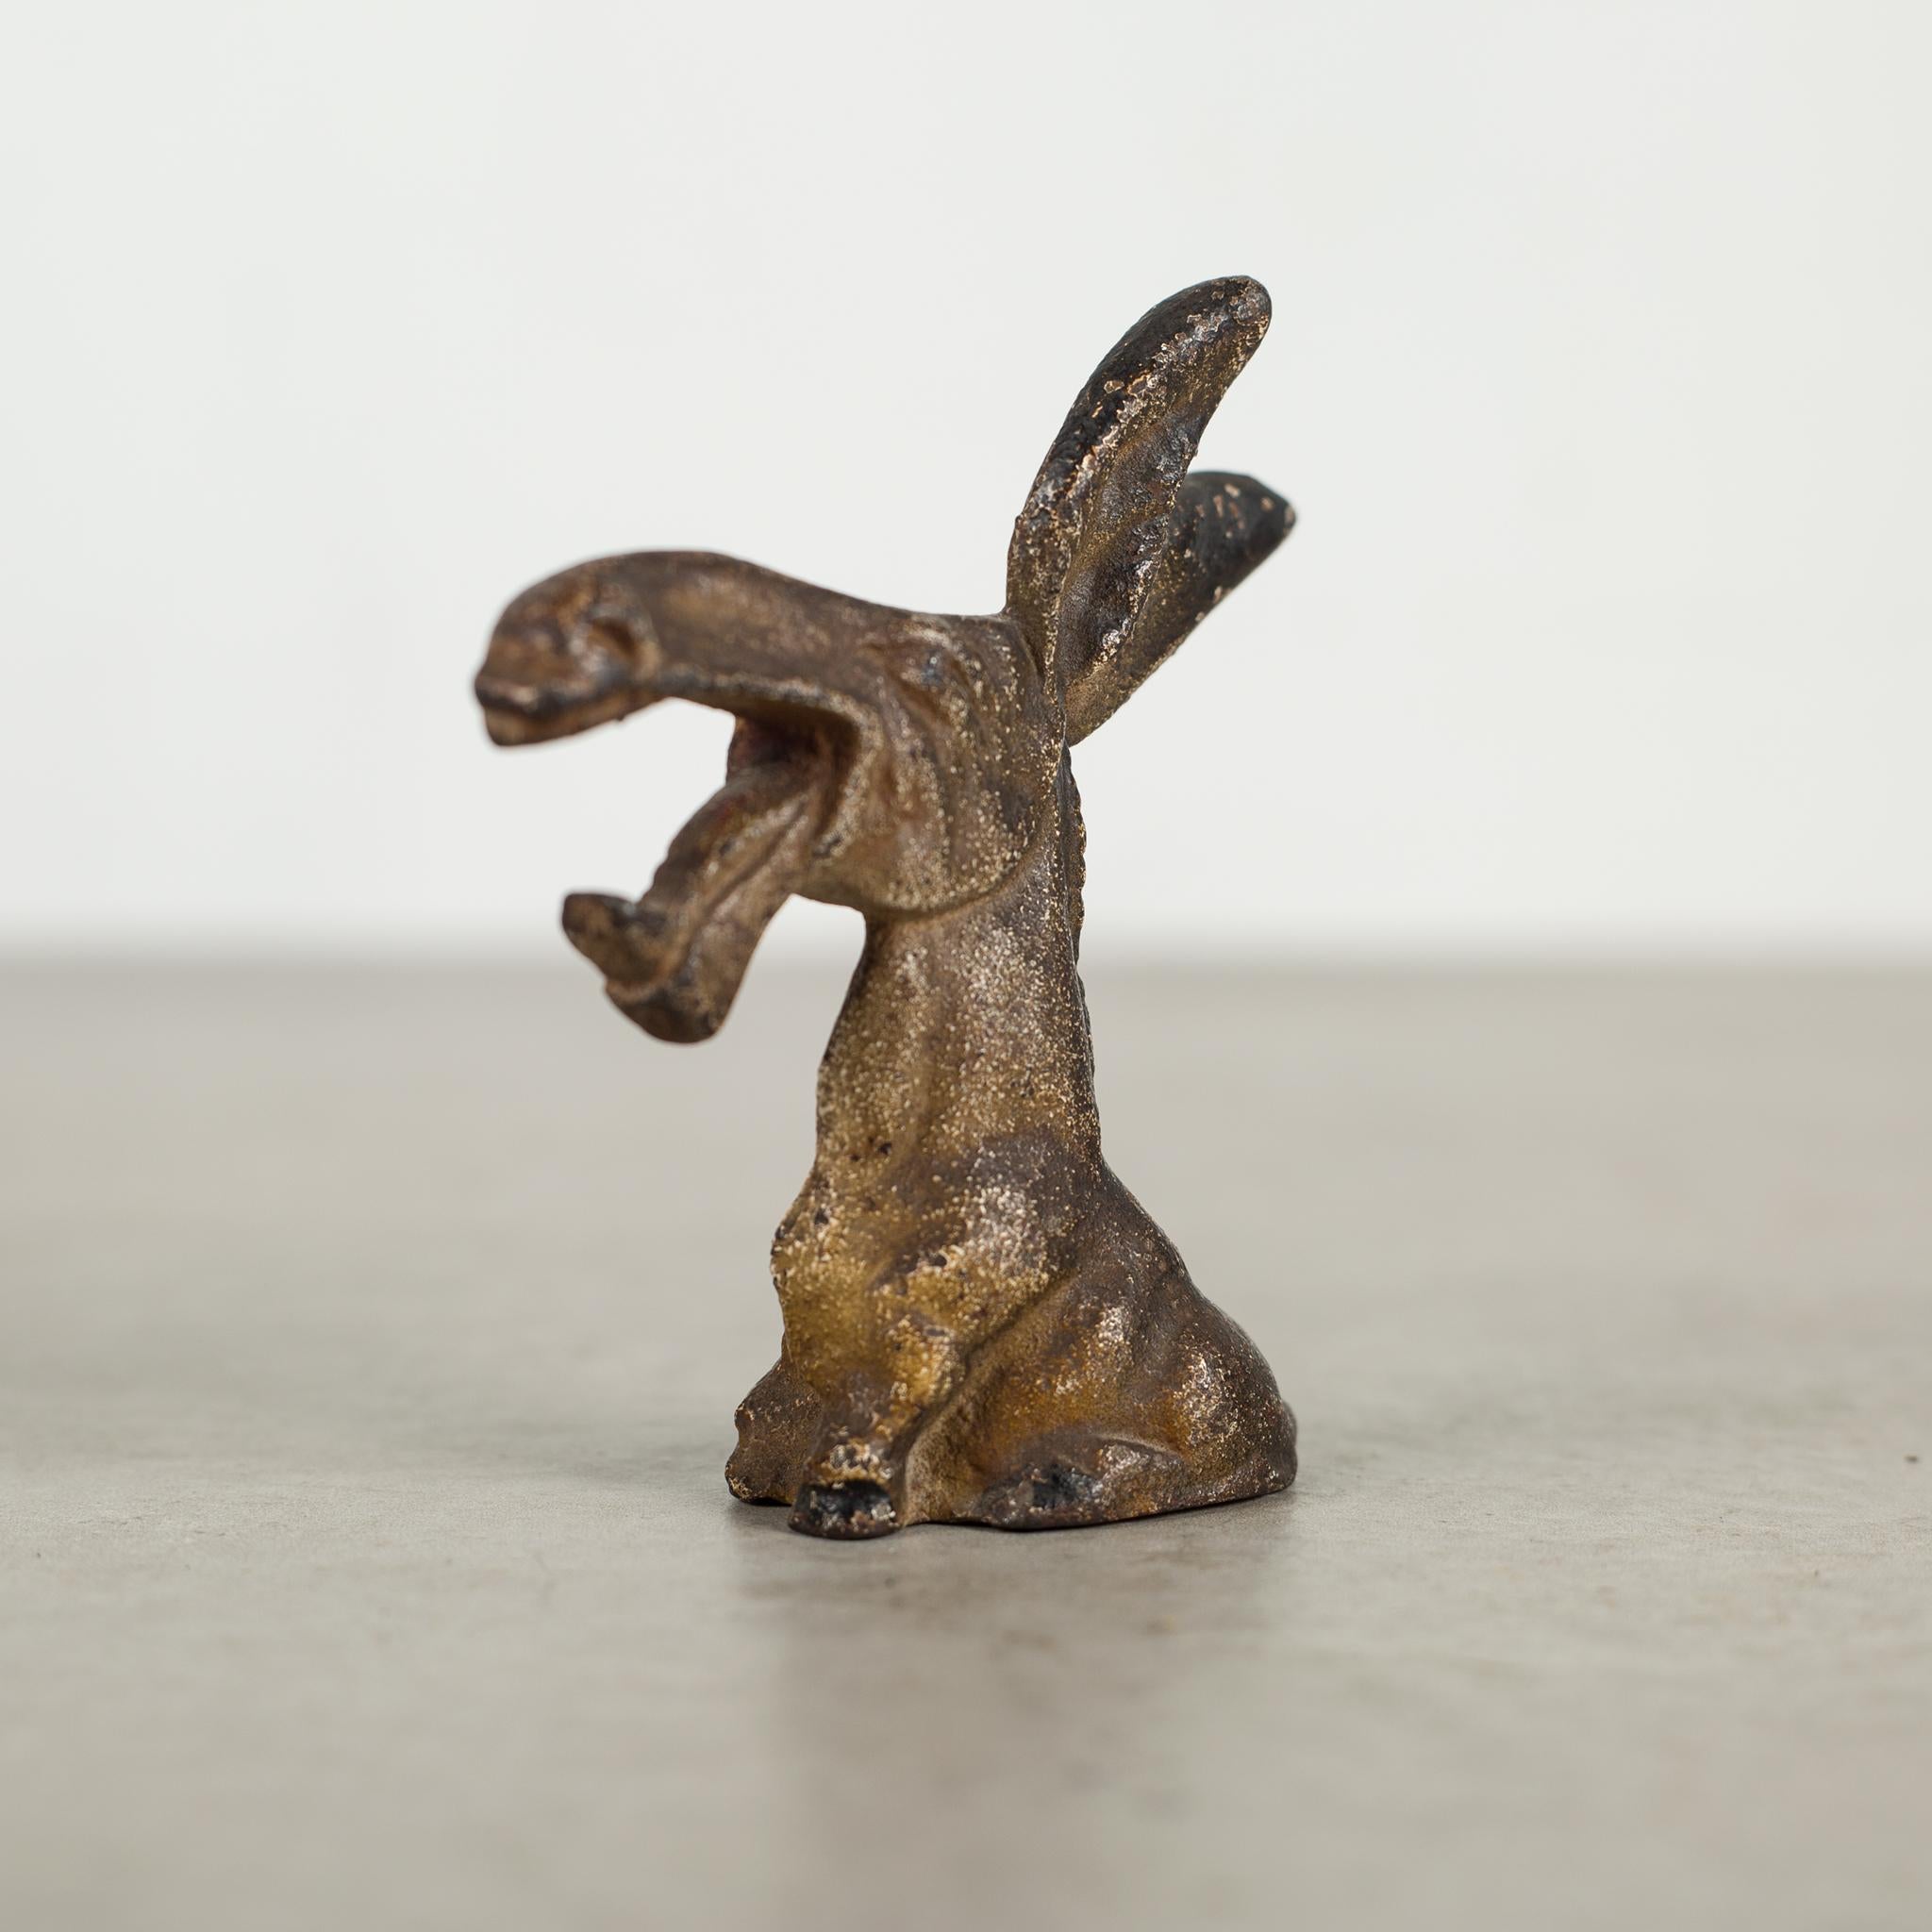 This is an original cast iron donkey bottle opener manufactured by the Hubley Manufacturing Company in Lancaster Pennsylvania, USA. The piece has retained its original hand painted finish and is in excellent condition with the appropriate patina for